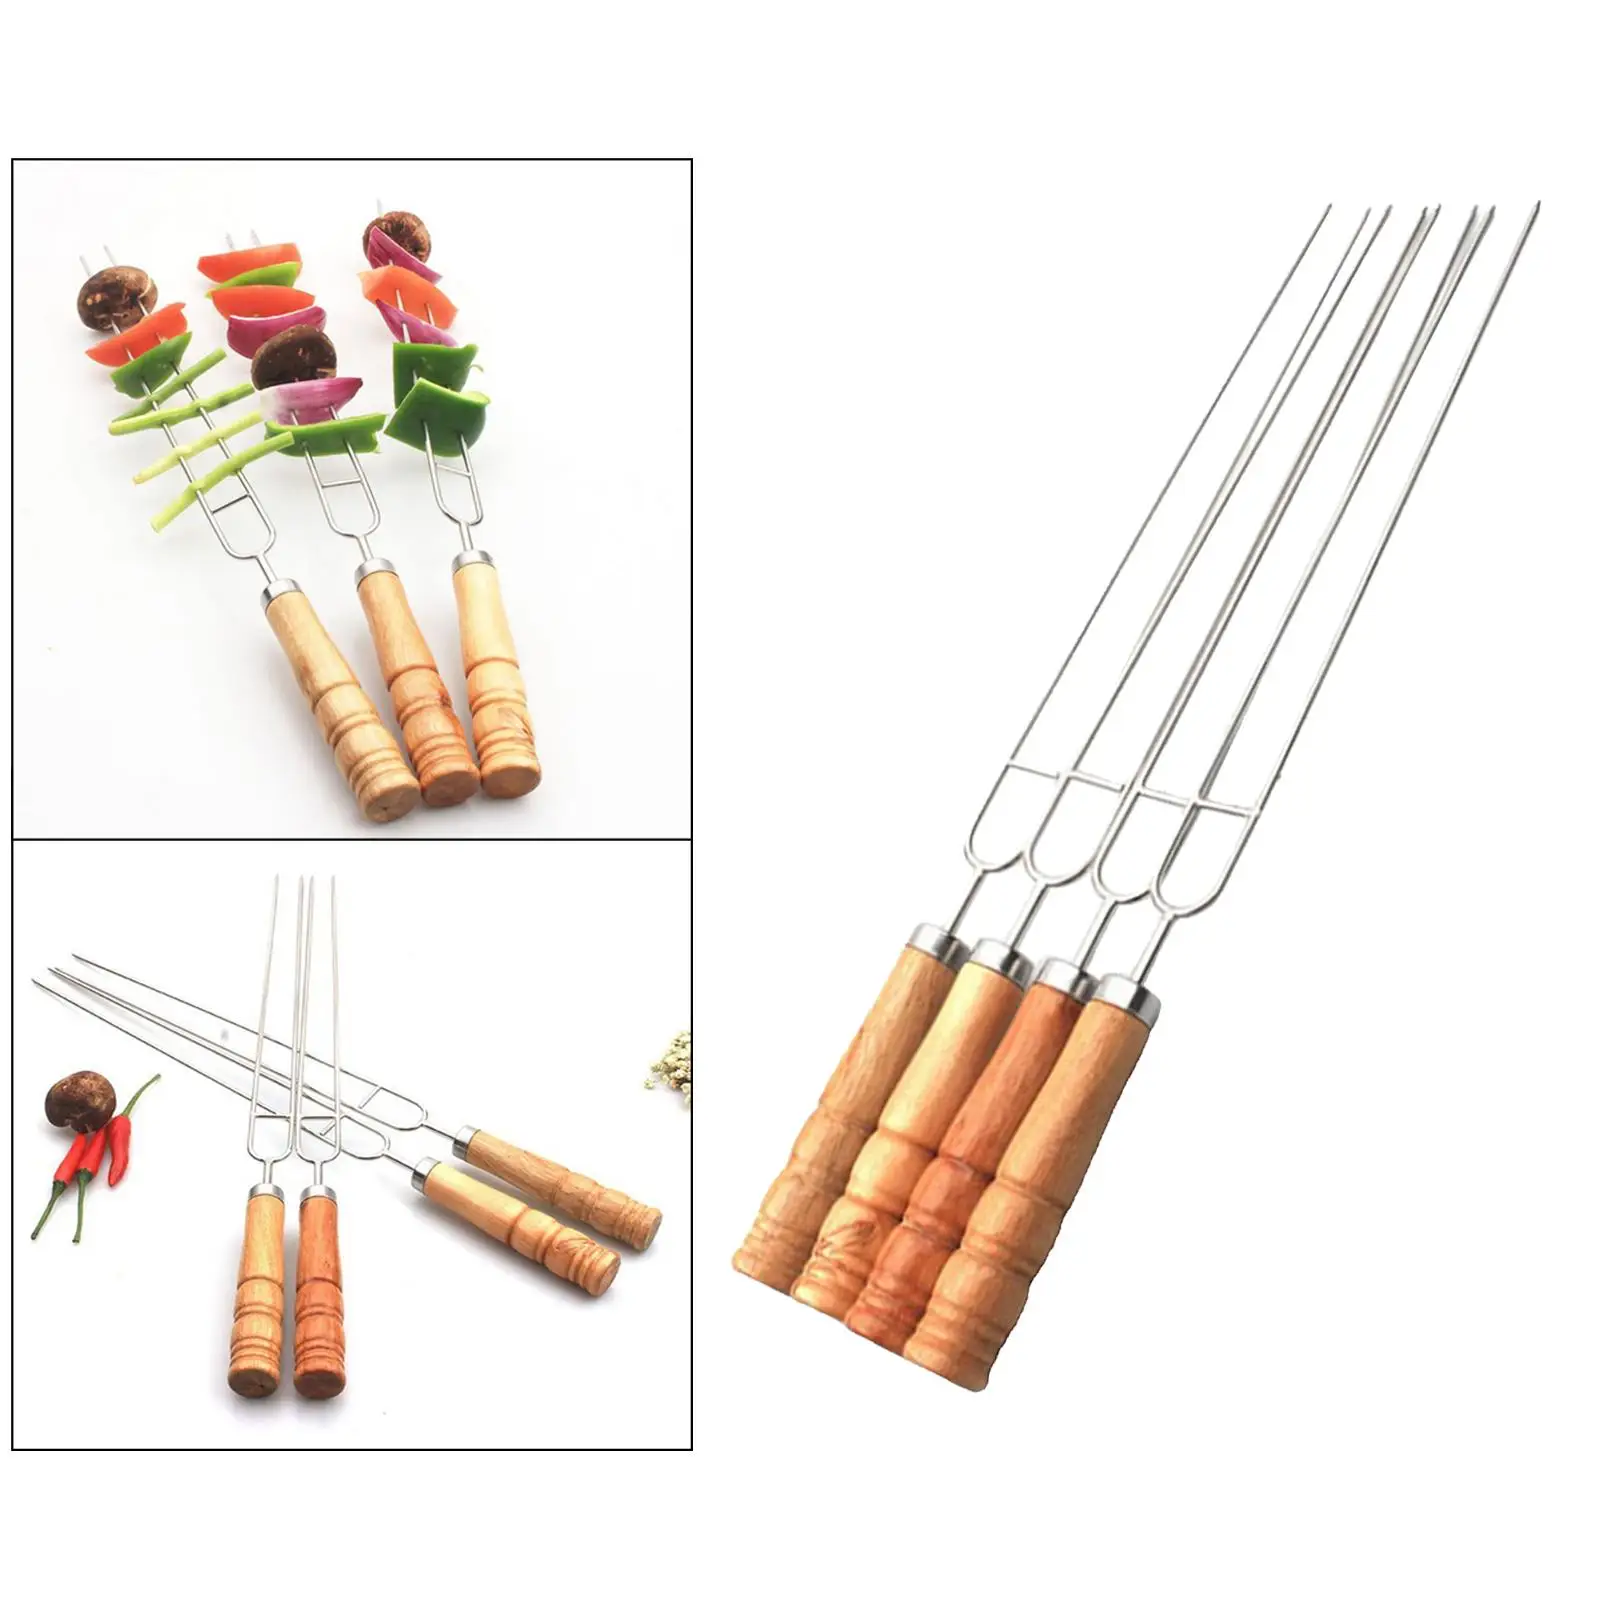 6pcs Barbecue Grill Fork Stainless Steel U-Shaped BBQ Skewer With Anti-scald Wooden Handle Metal Fork Set for Outdoor BBQ Grill